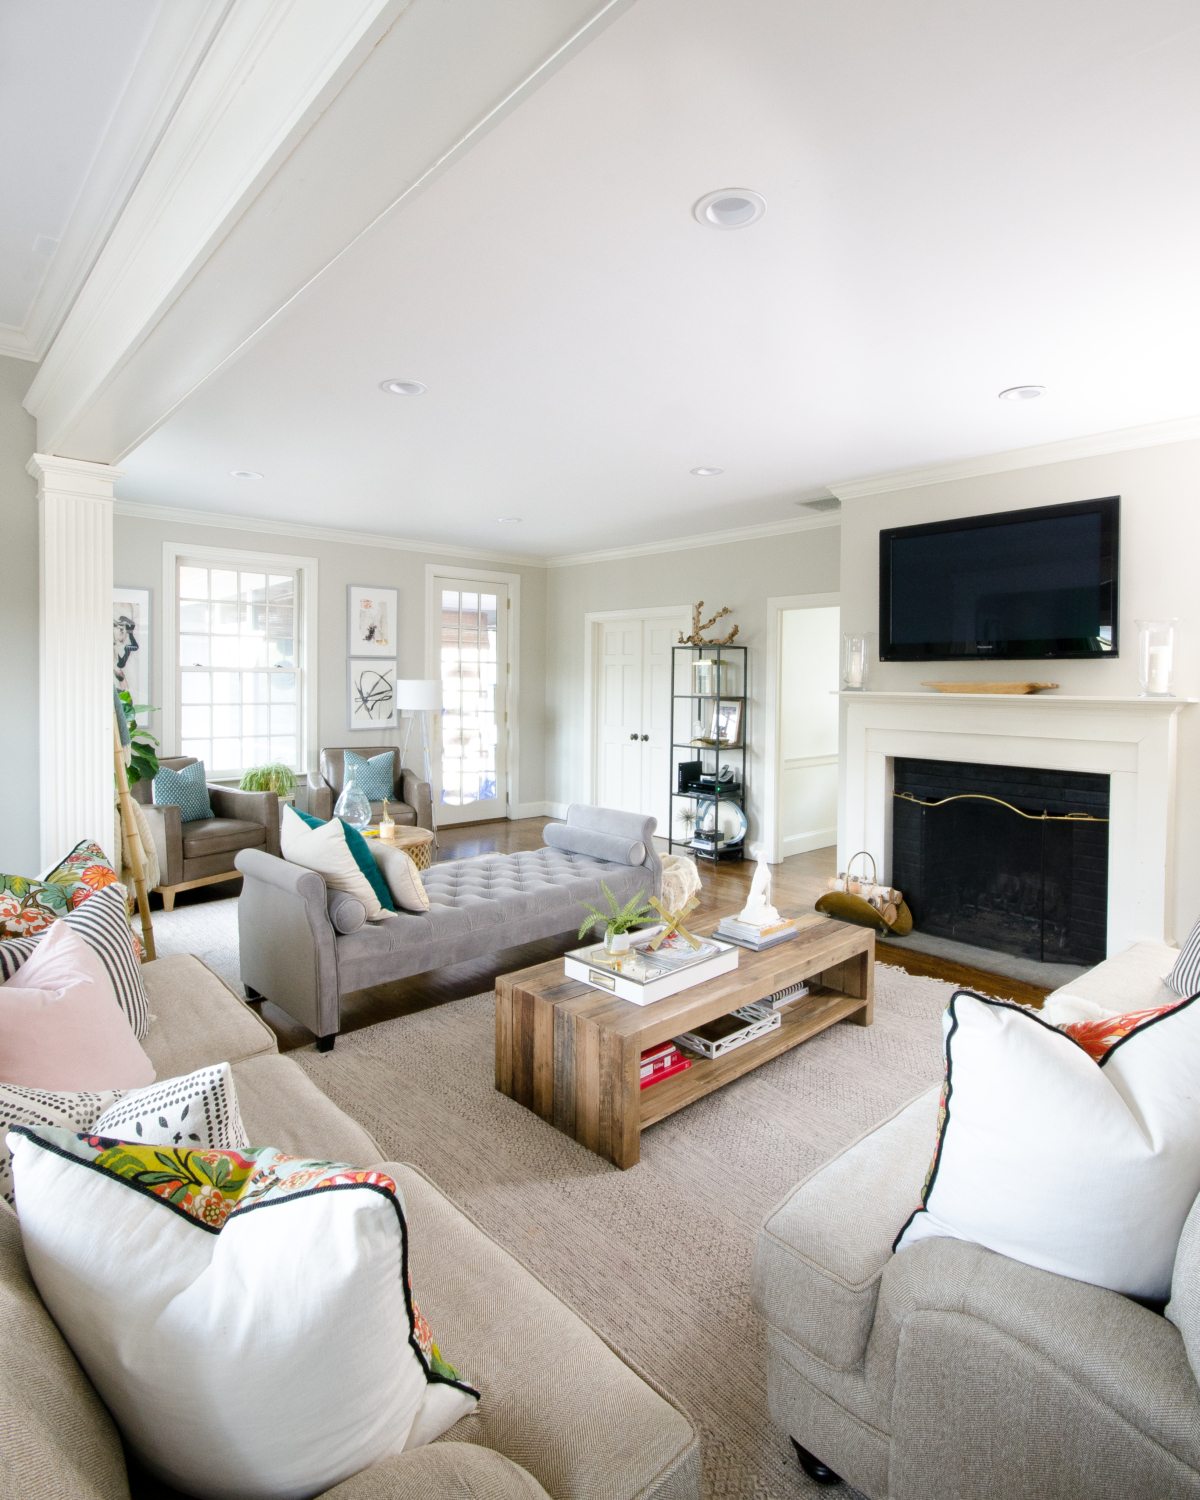 A spring family room that shows how to create a stylish space that's still family friendly. Simple and pretty ideas for spring decorating.